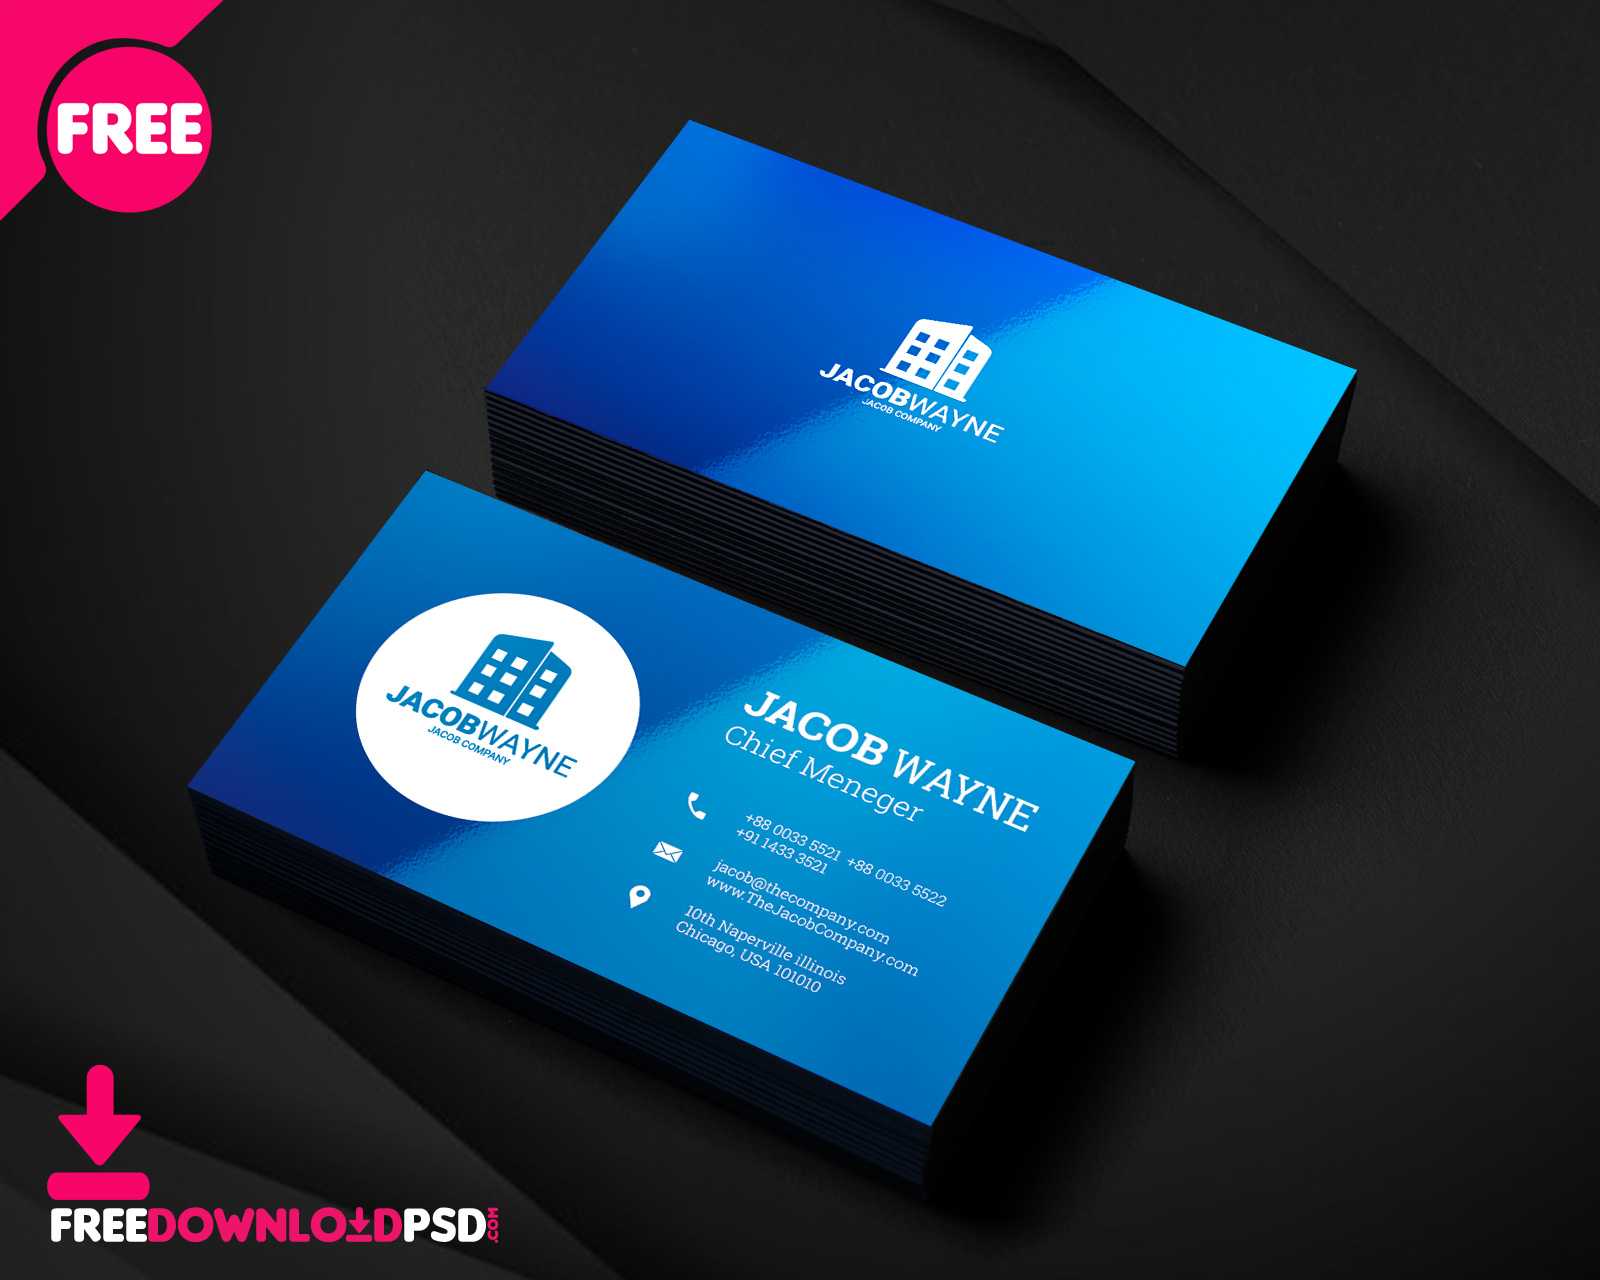 Real Estate Business Card Psd | Freedownloadpsd Throughout Photoshop Cs6 Business Card Template